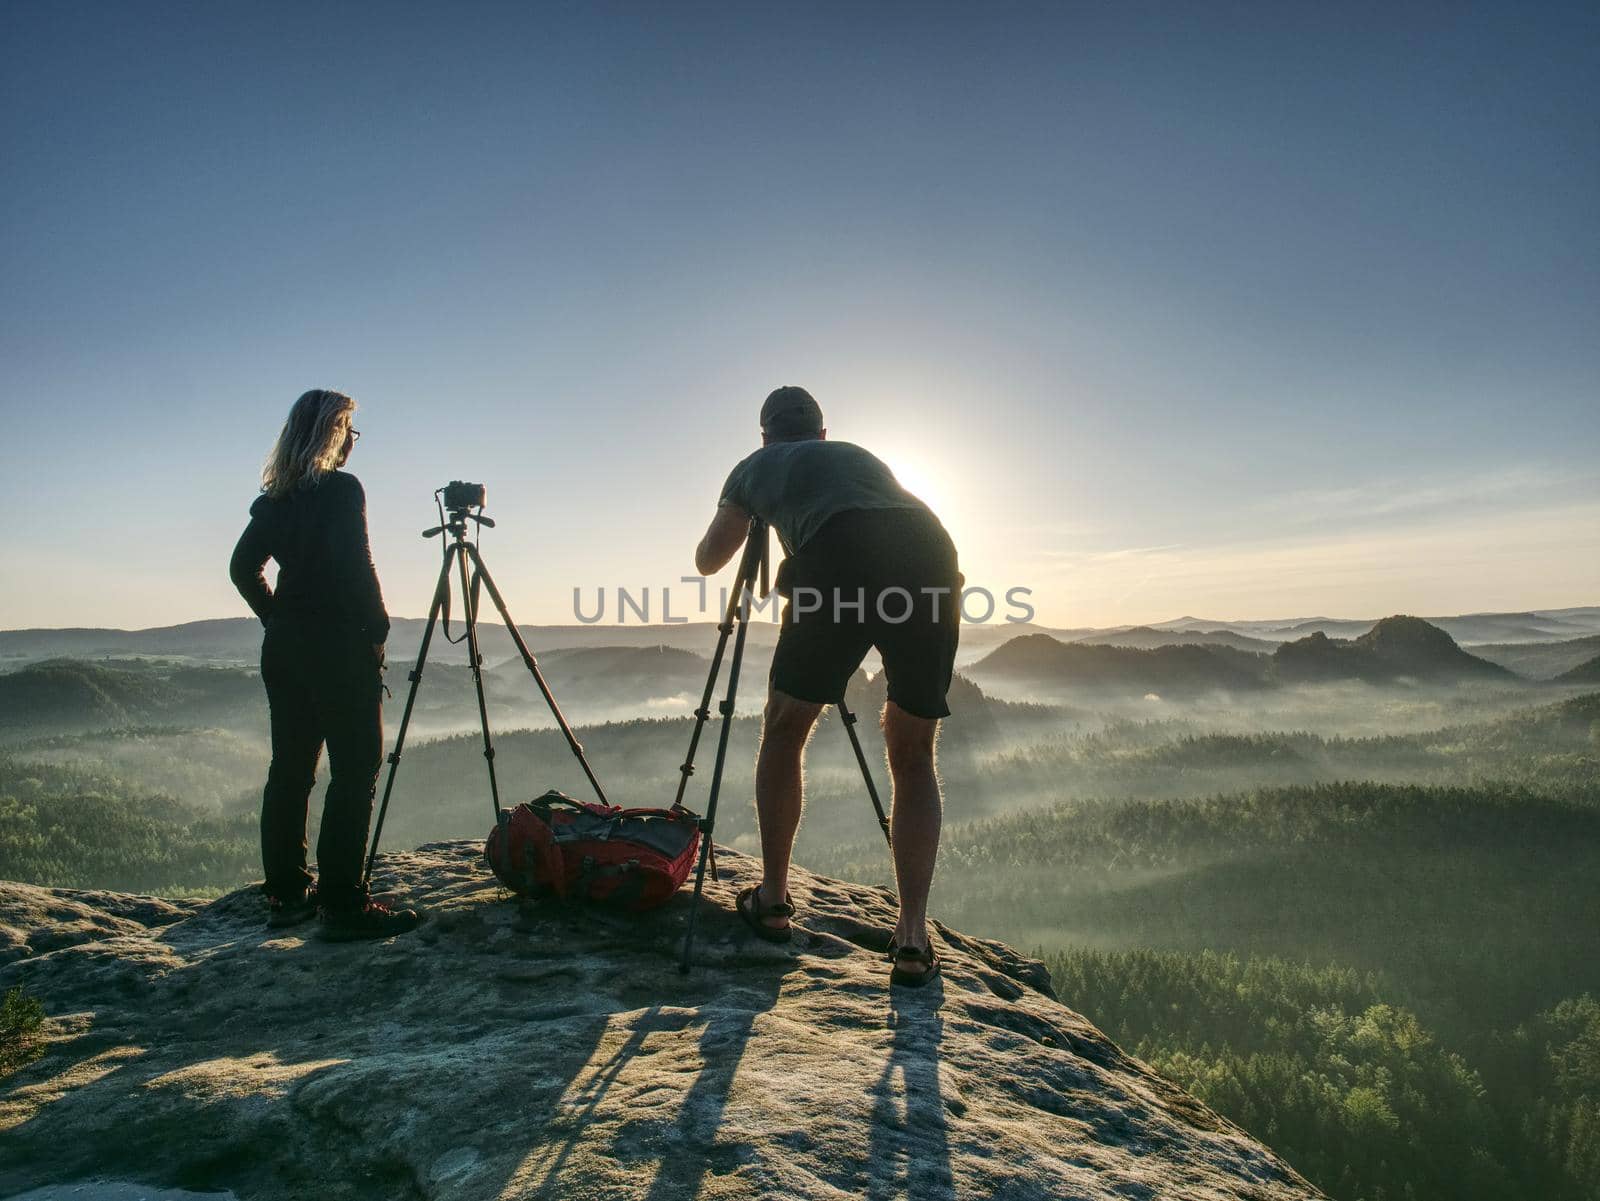 Creative artists stay at own cameras on tripods.  Hikers and photo enthusiasts work together on cliff and thinking